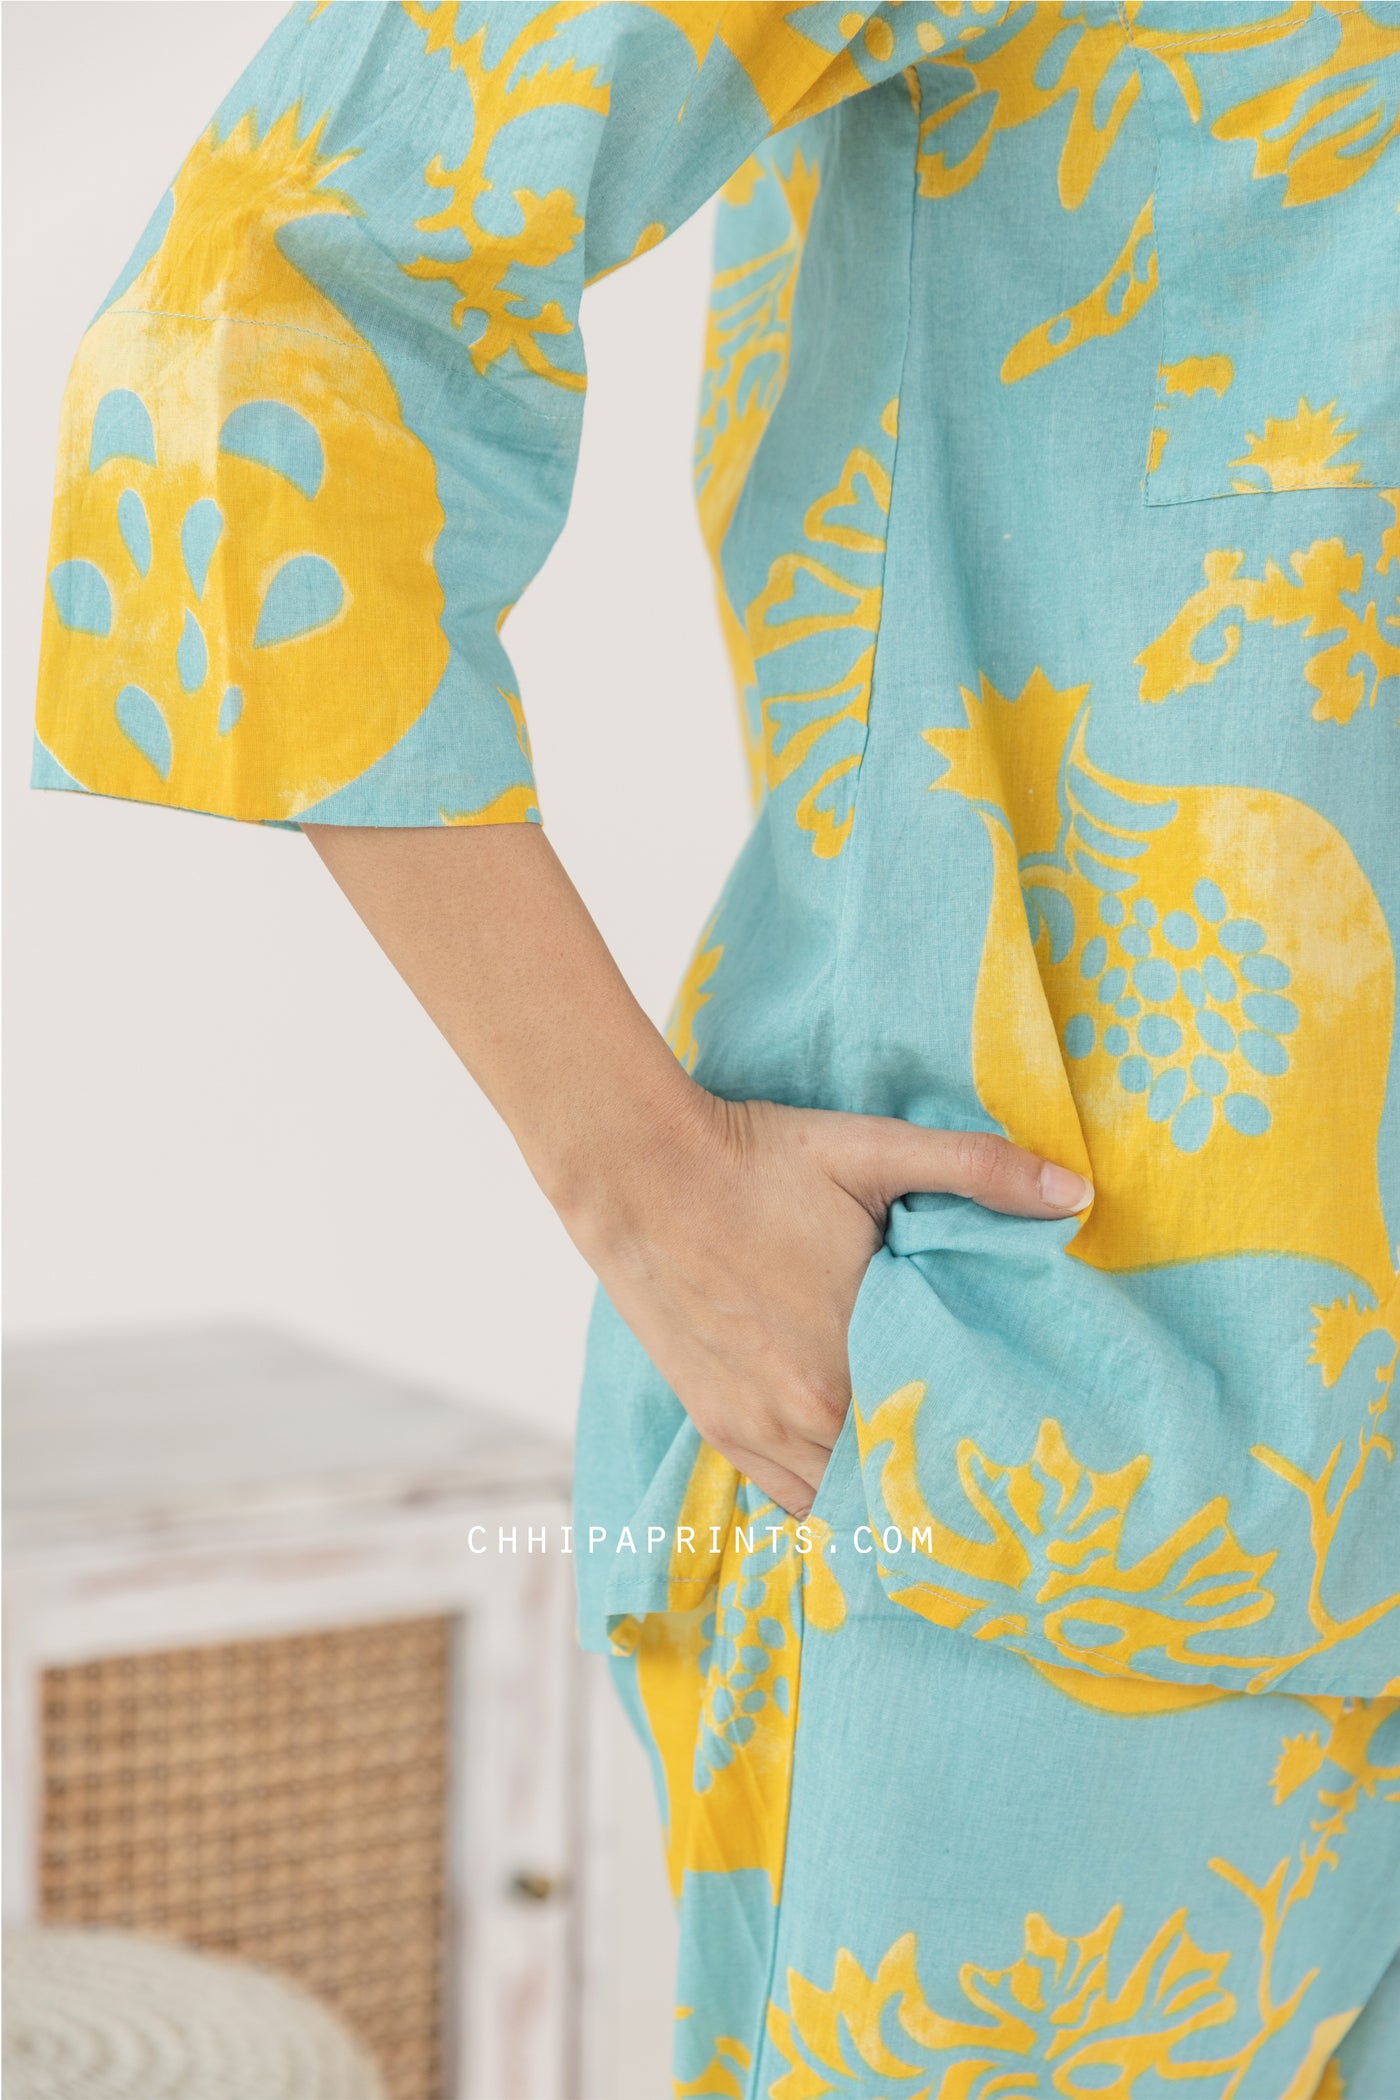 Cotton Hand Printed Anar Jaal Co Ord Set in Shades of Green and Yellow